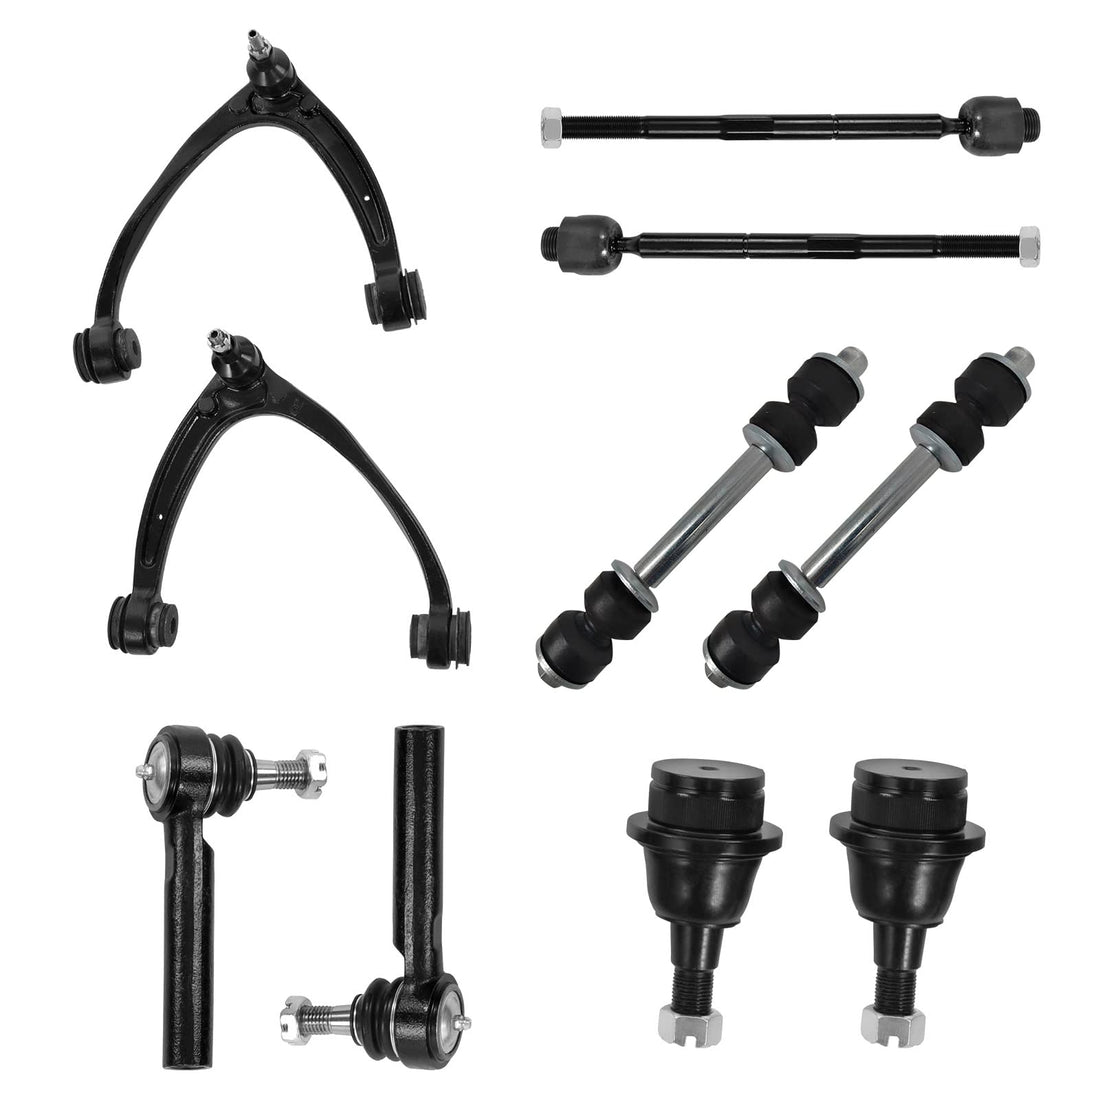 Silverado 1500 Steering Kit: 10pc Front Control Arms, Ball Joint, Tie Rod